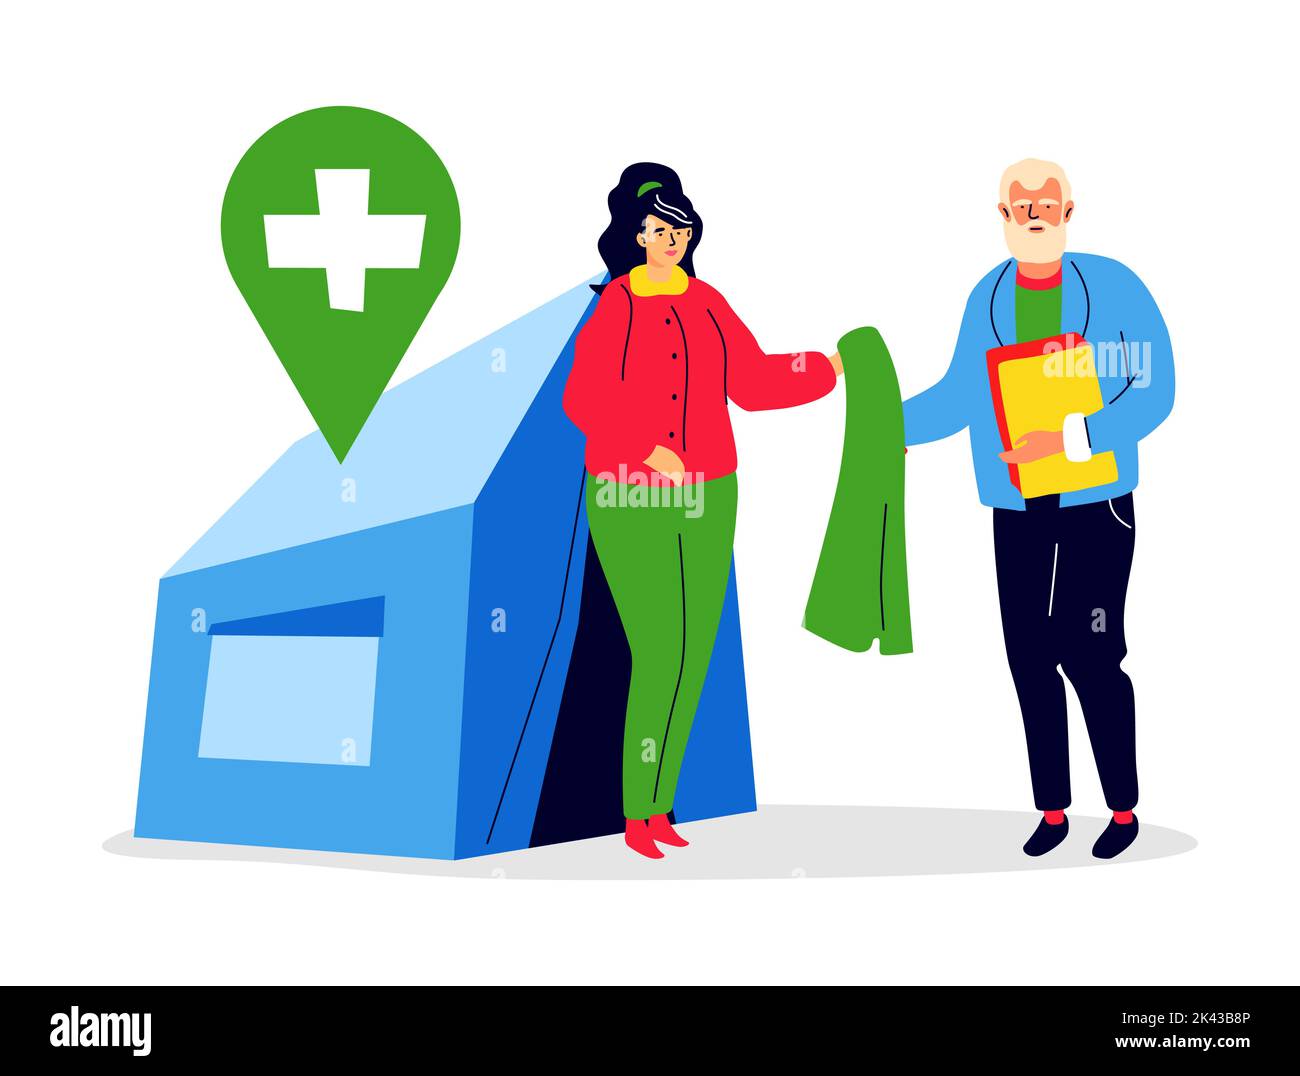 Refugees assistance - modern colorful flat design style illustration on white background. A scene with help tent, volunteer and elderly person in need Stock Vector